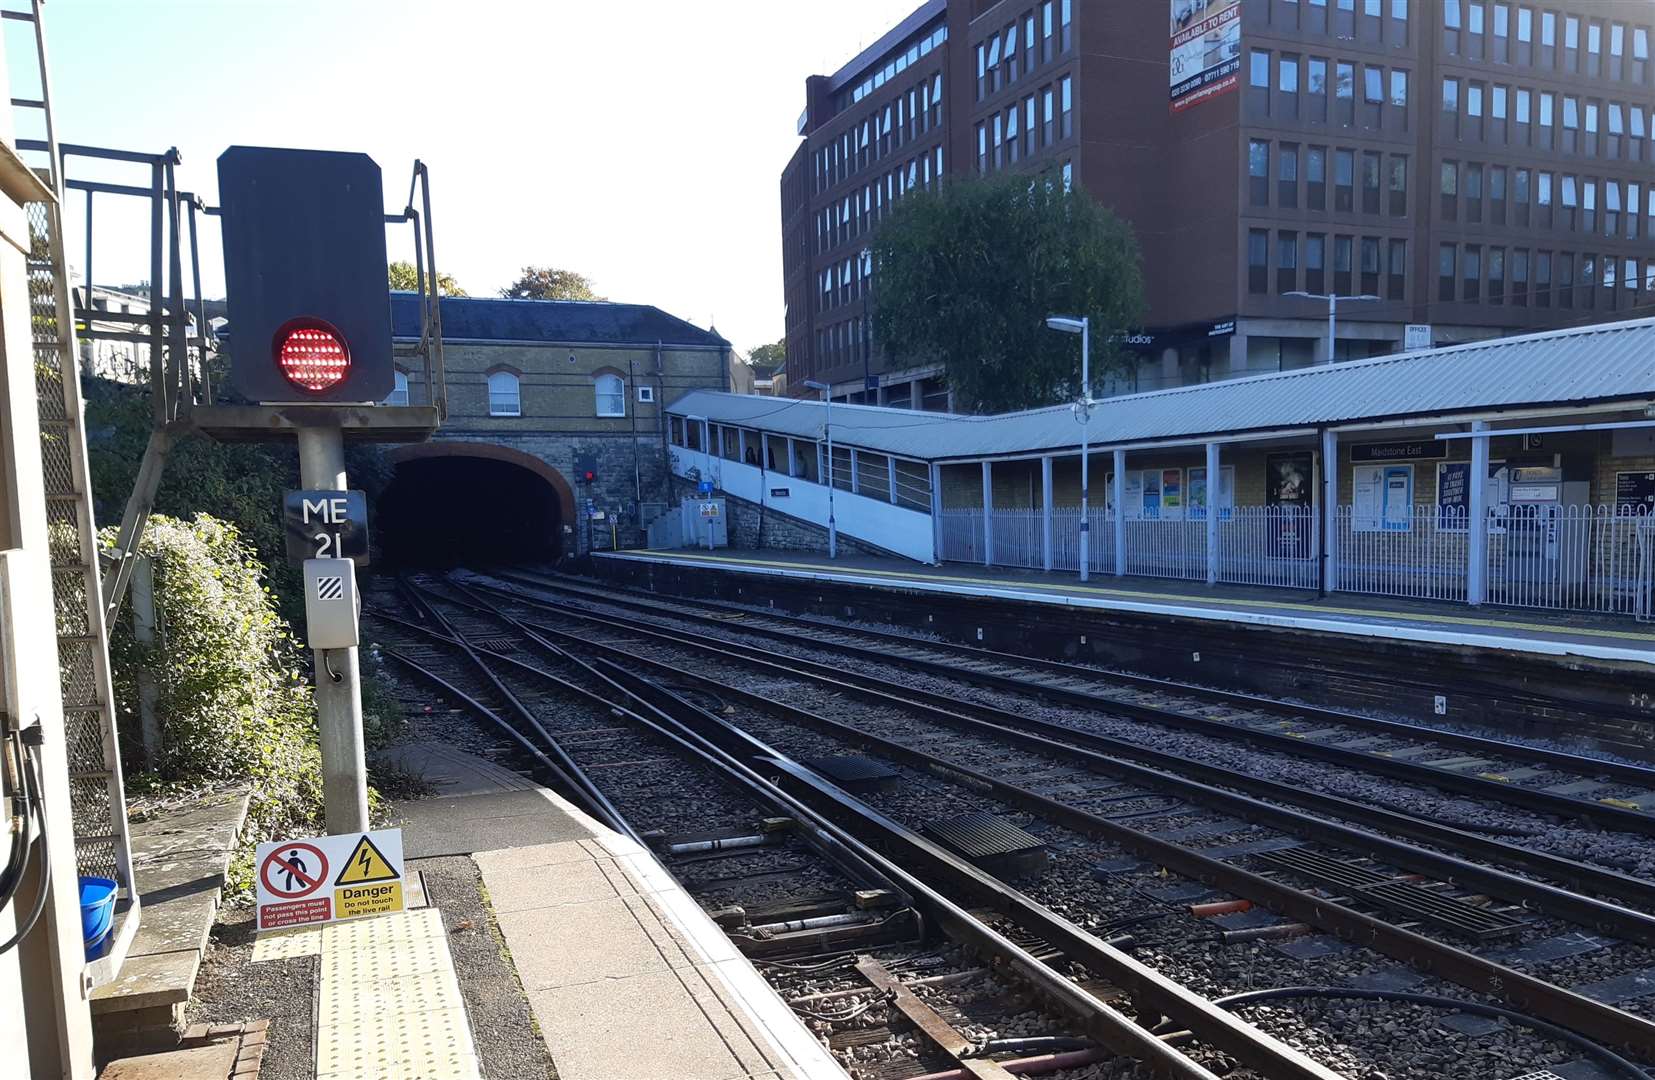 Maidstone East is set to benefit from a near hourly service direct to Charing Cross